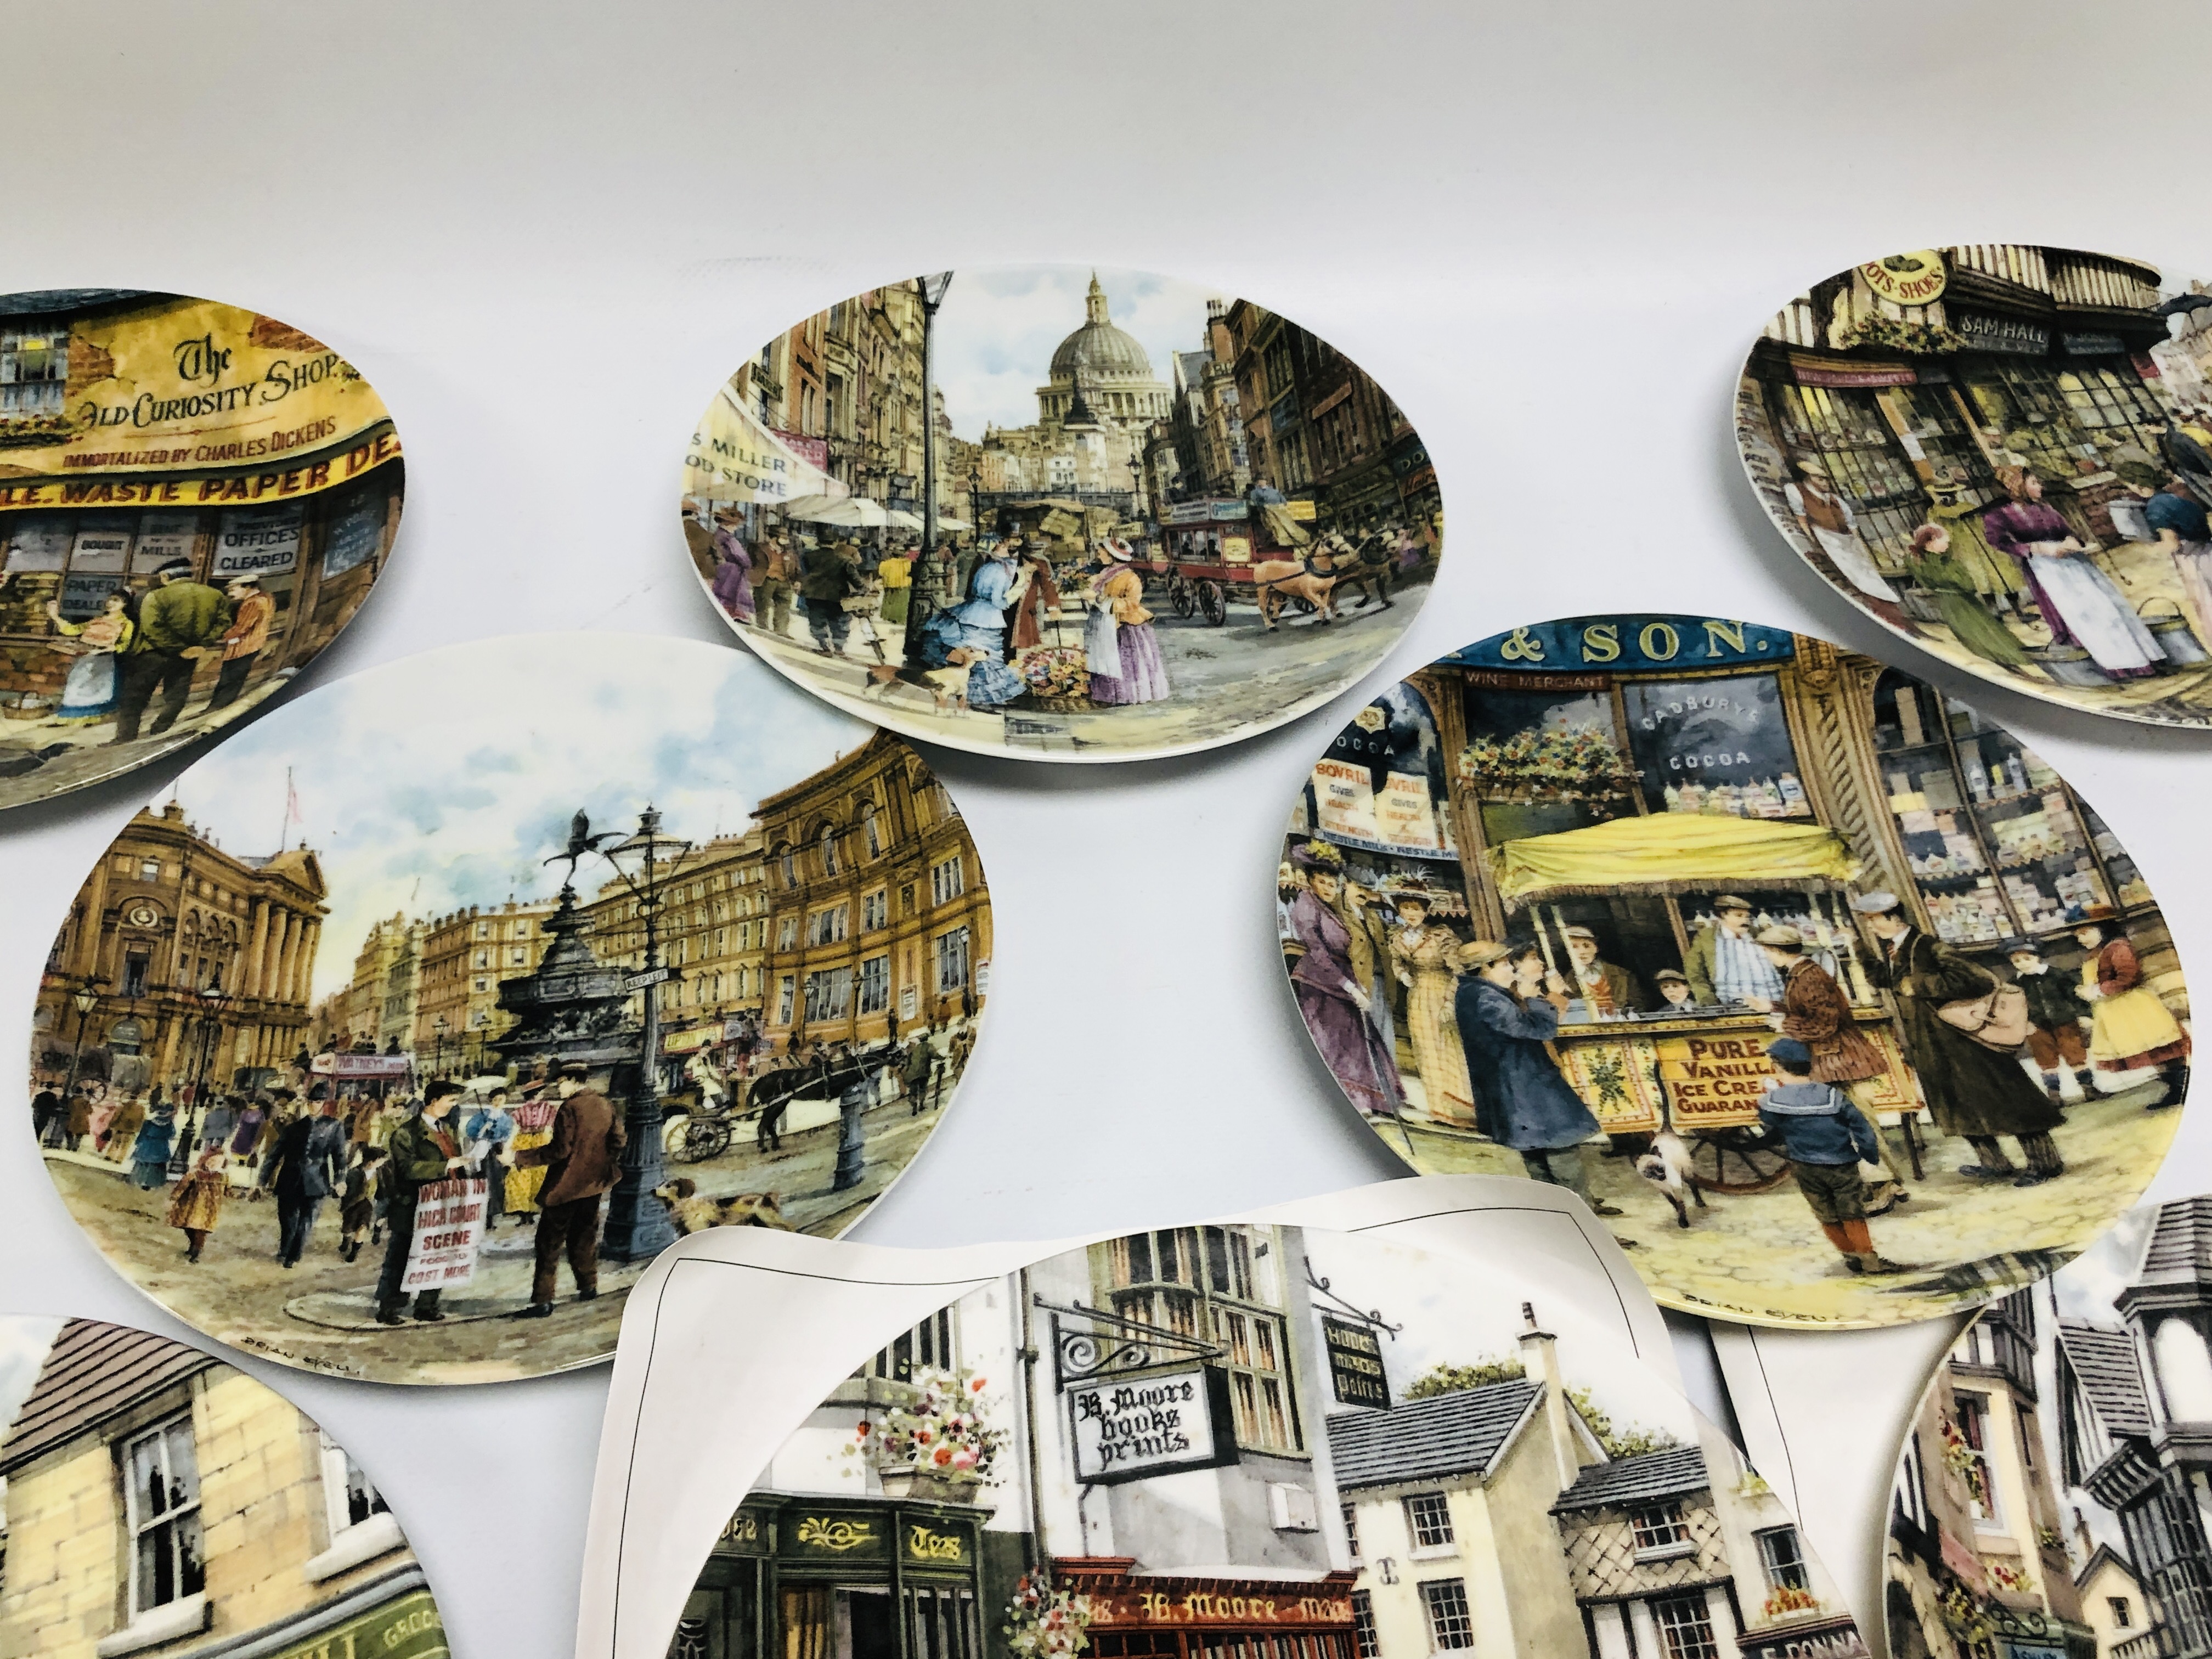 4 X DAVENPORT COLLECTORS PLATES "CRIES OF LONDON" SERIES WITH BOXES + 2 WITHOUT BOXES + 6 X ROYAL - Image 3 of 8